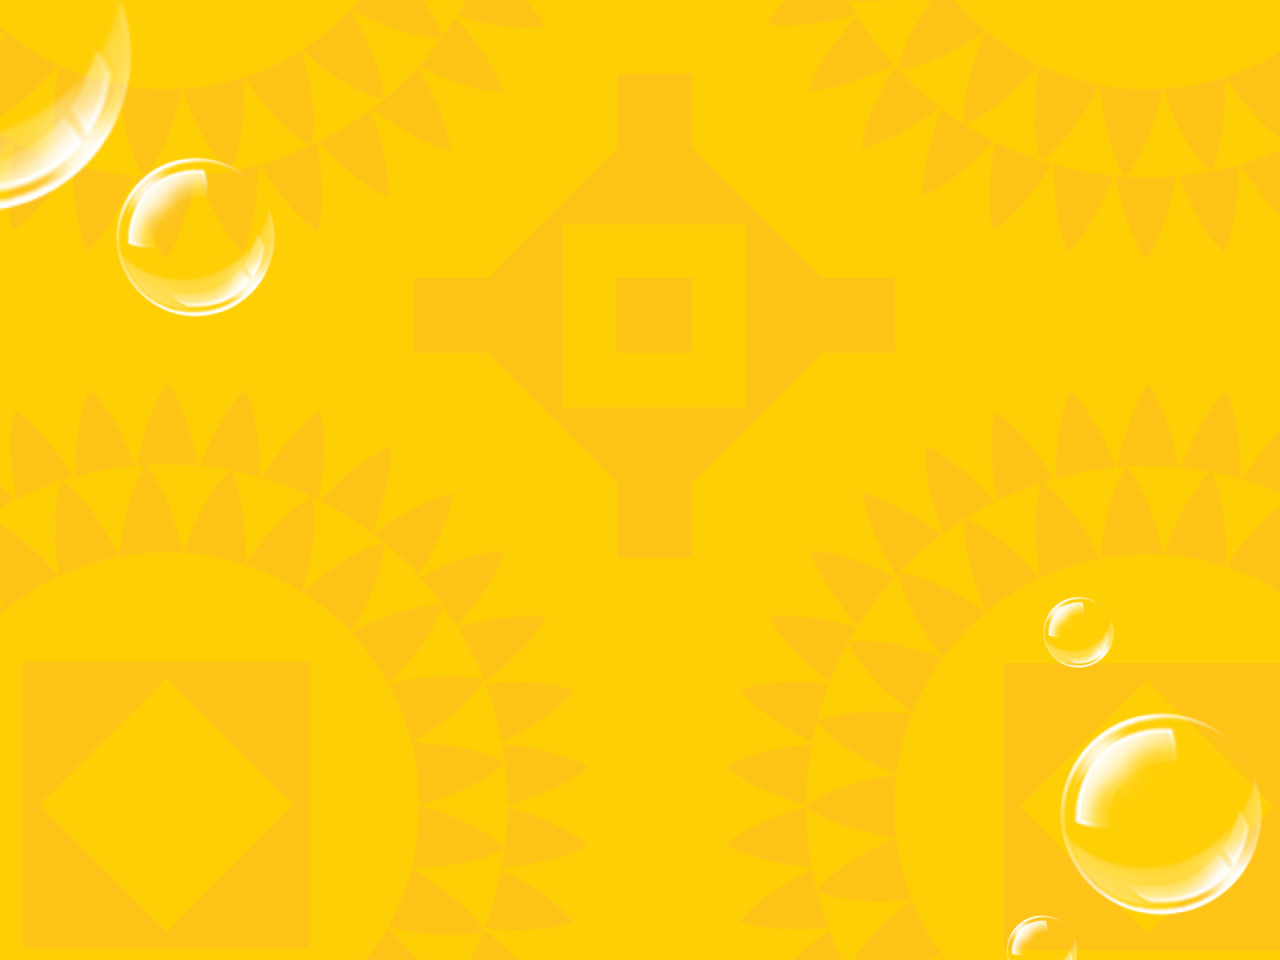 Yellow background with bubbles and shapes